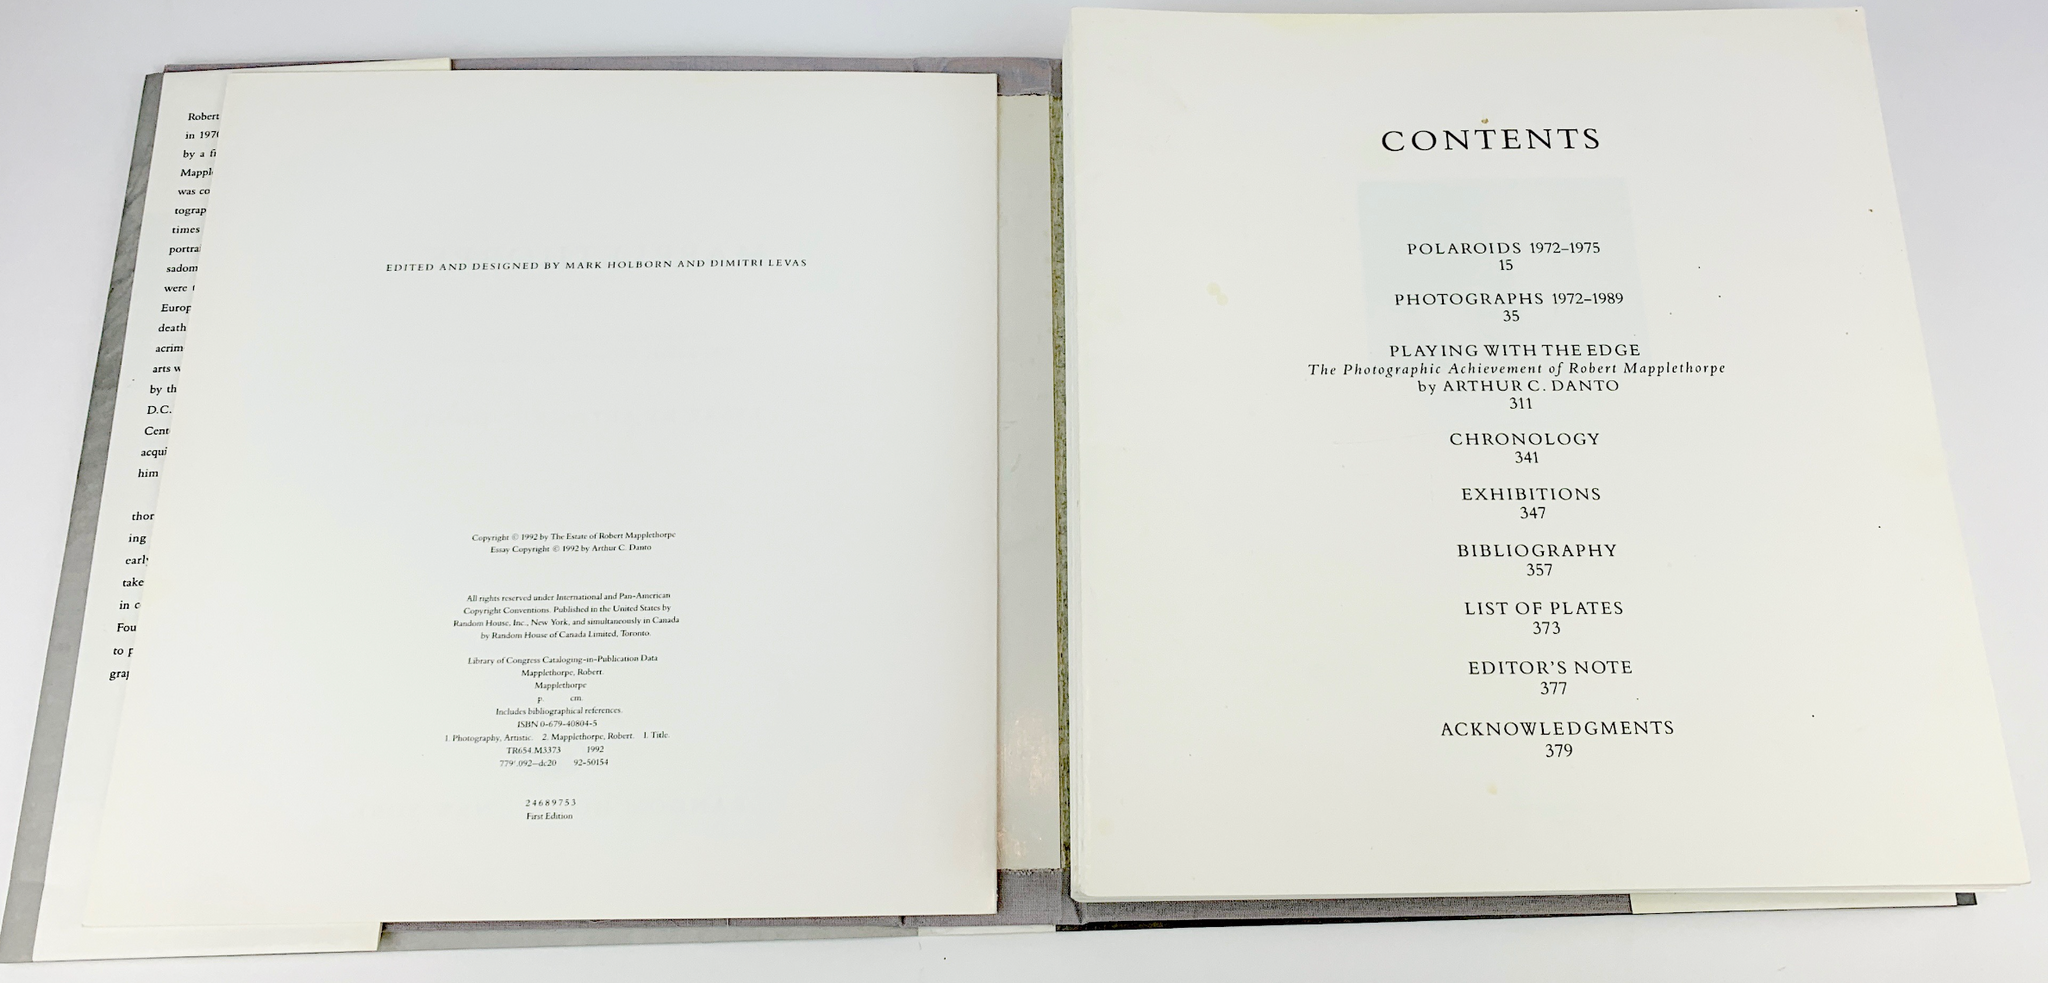 [Mapplethorpe, Robert. (1946–1989)] [Glover, Tony. (1939–2019)] Smith, Patti. (b. 1946): "Mapplethorpe" - Unbound Galley Proof from Mapplethorpe's Studio, with a letter of provenance from Patti Smith